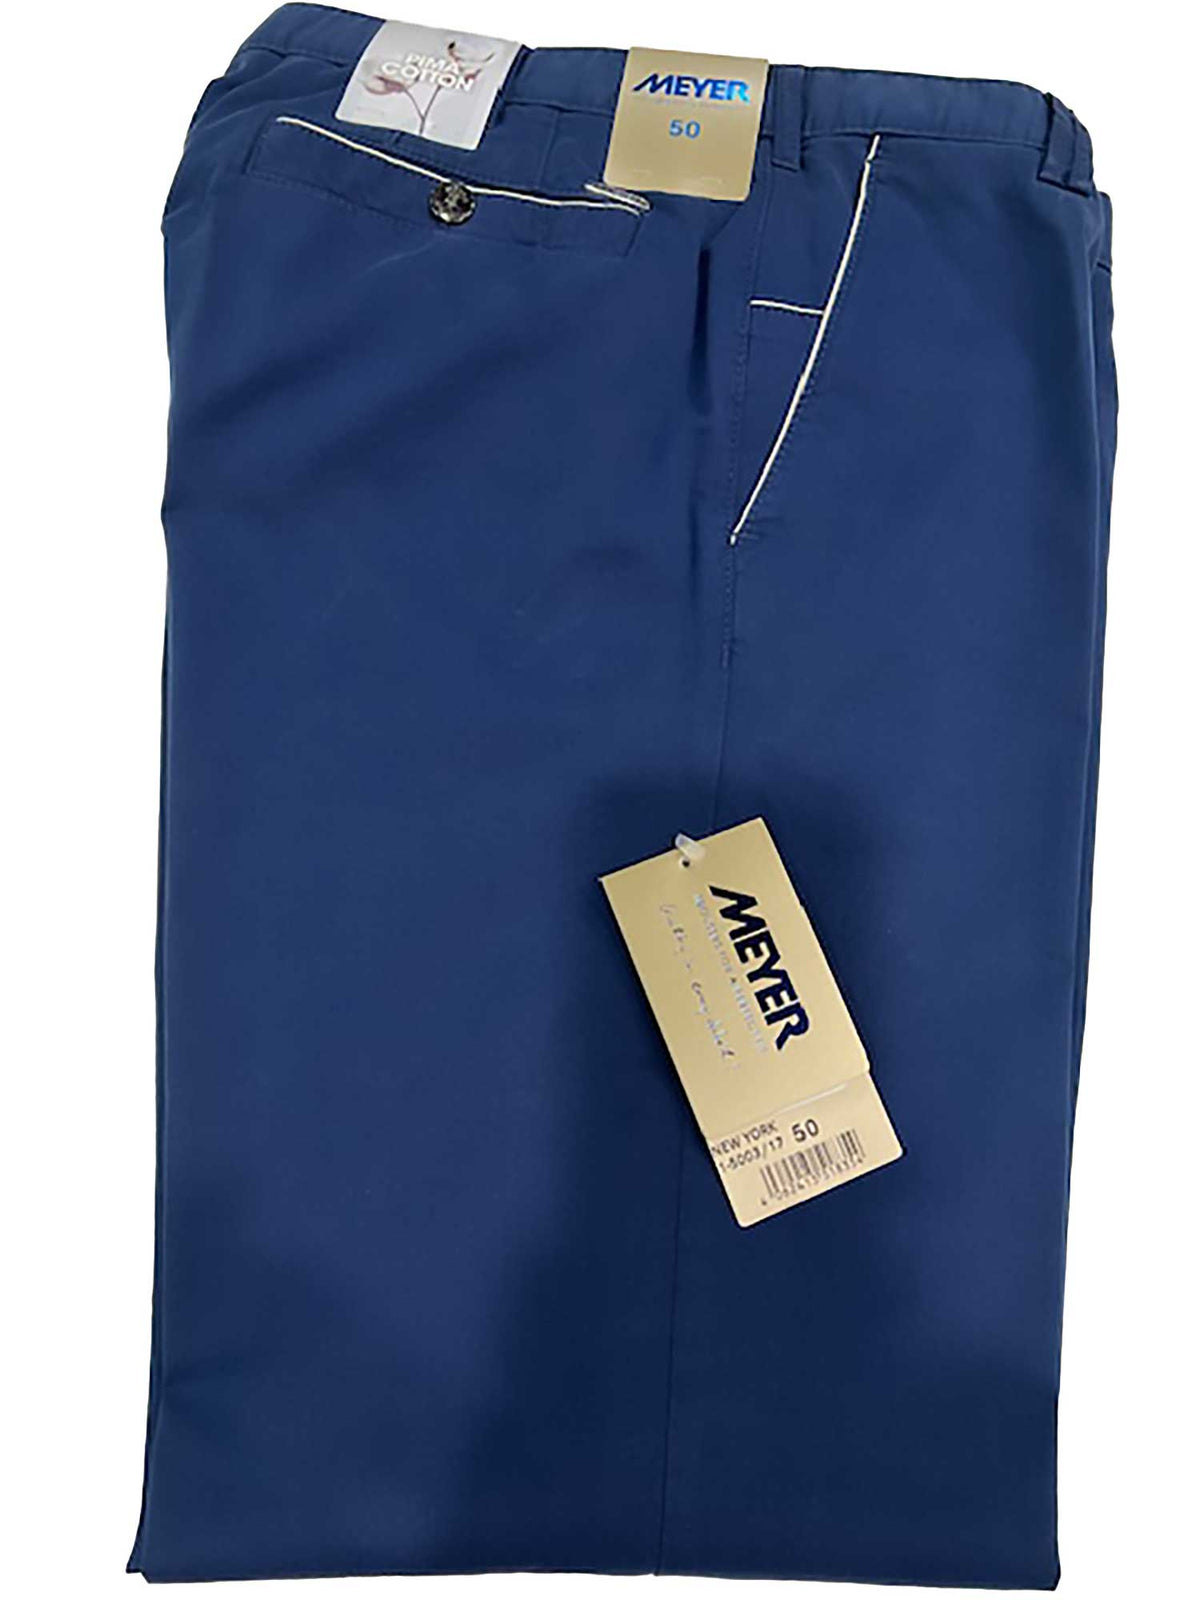 Meyer New York-5003/17  https://harrysformenswear.com.au/products/meyer-new-york-5003-17  Meyer Casual Trousers are the perfect fit Invisible comfort created by high-performance super-stretch fabrics. 97% Cotton 3% Elastane Made in Romania Two side pockets with rear jetted pockets Fob pocket with contrast trim Internal security pocket with zip Full-extension band with metal Clip + 2 buttons for a firm secur…